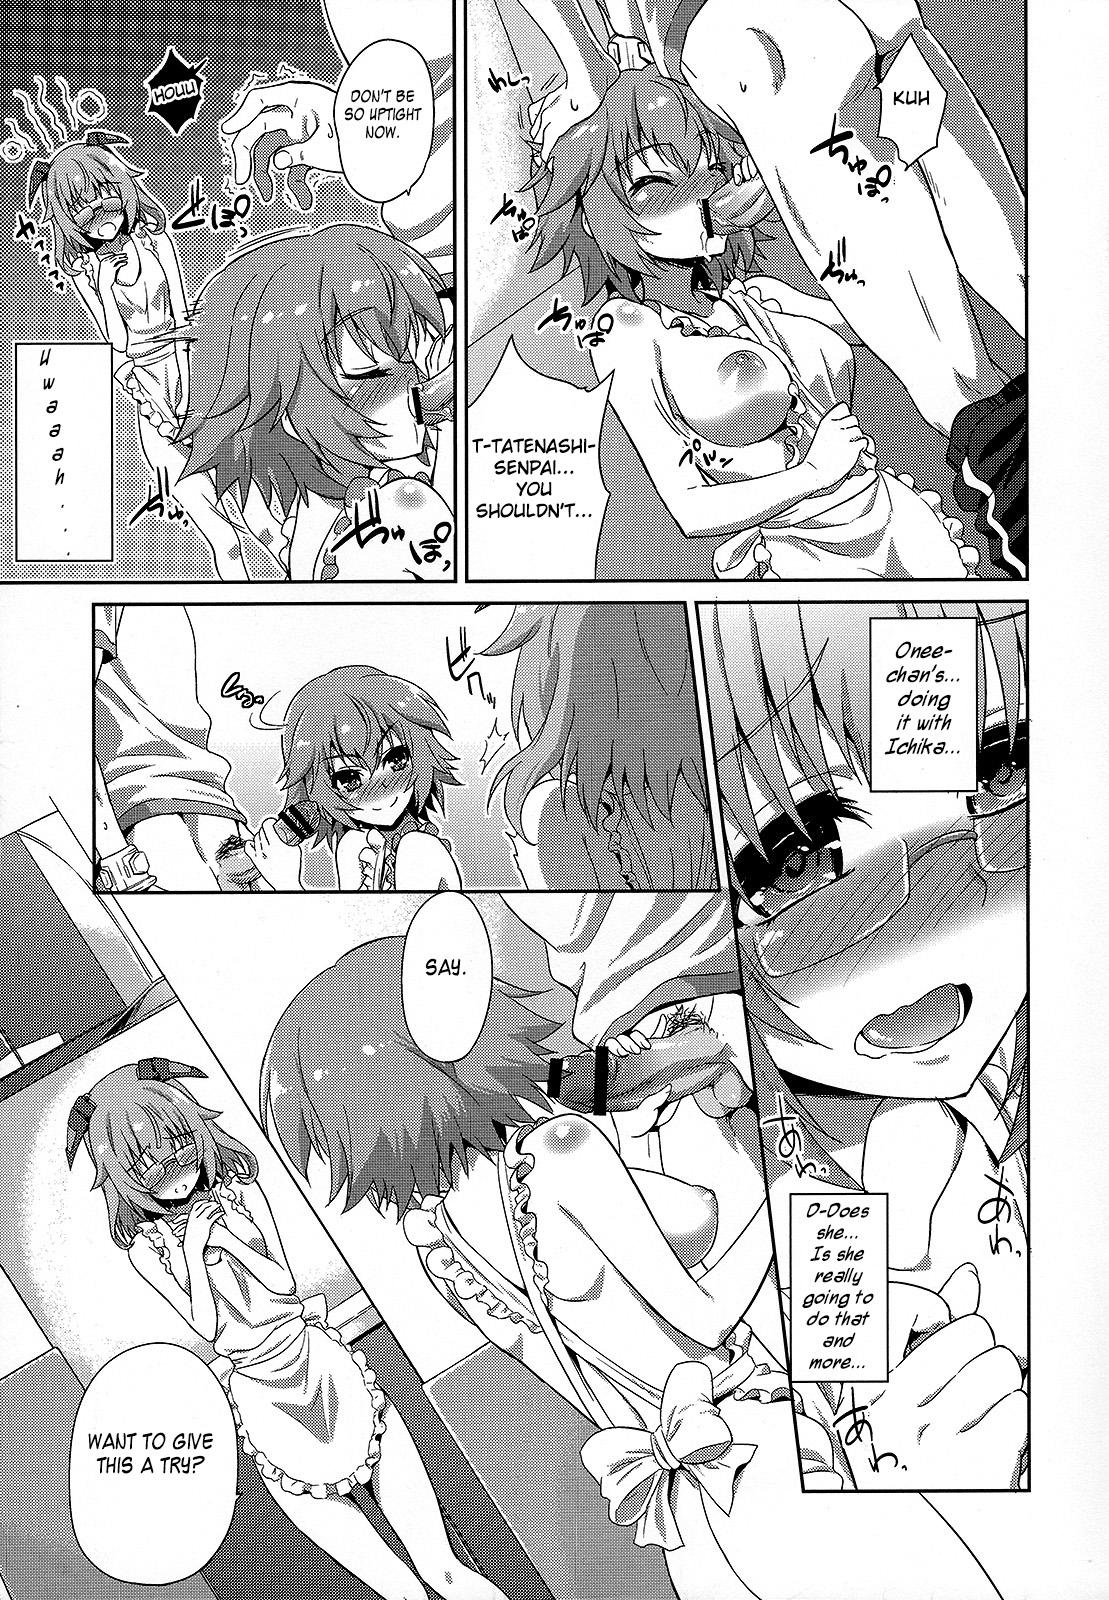 Public Fuck IS ICHIKA LOVE SISTERS!! - Infinite stratos Bokep - Page 6